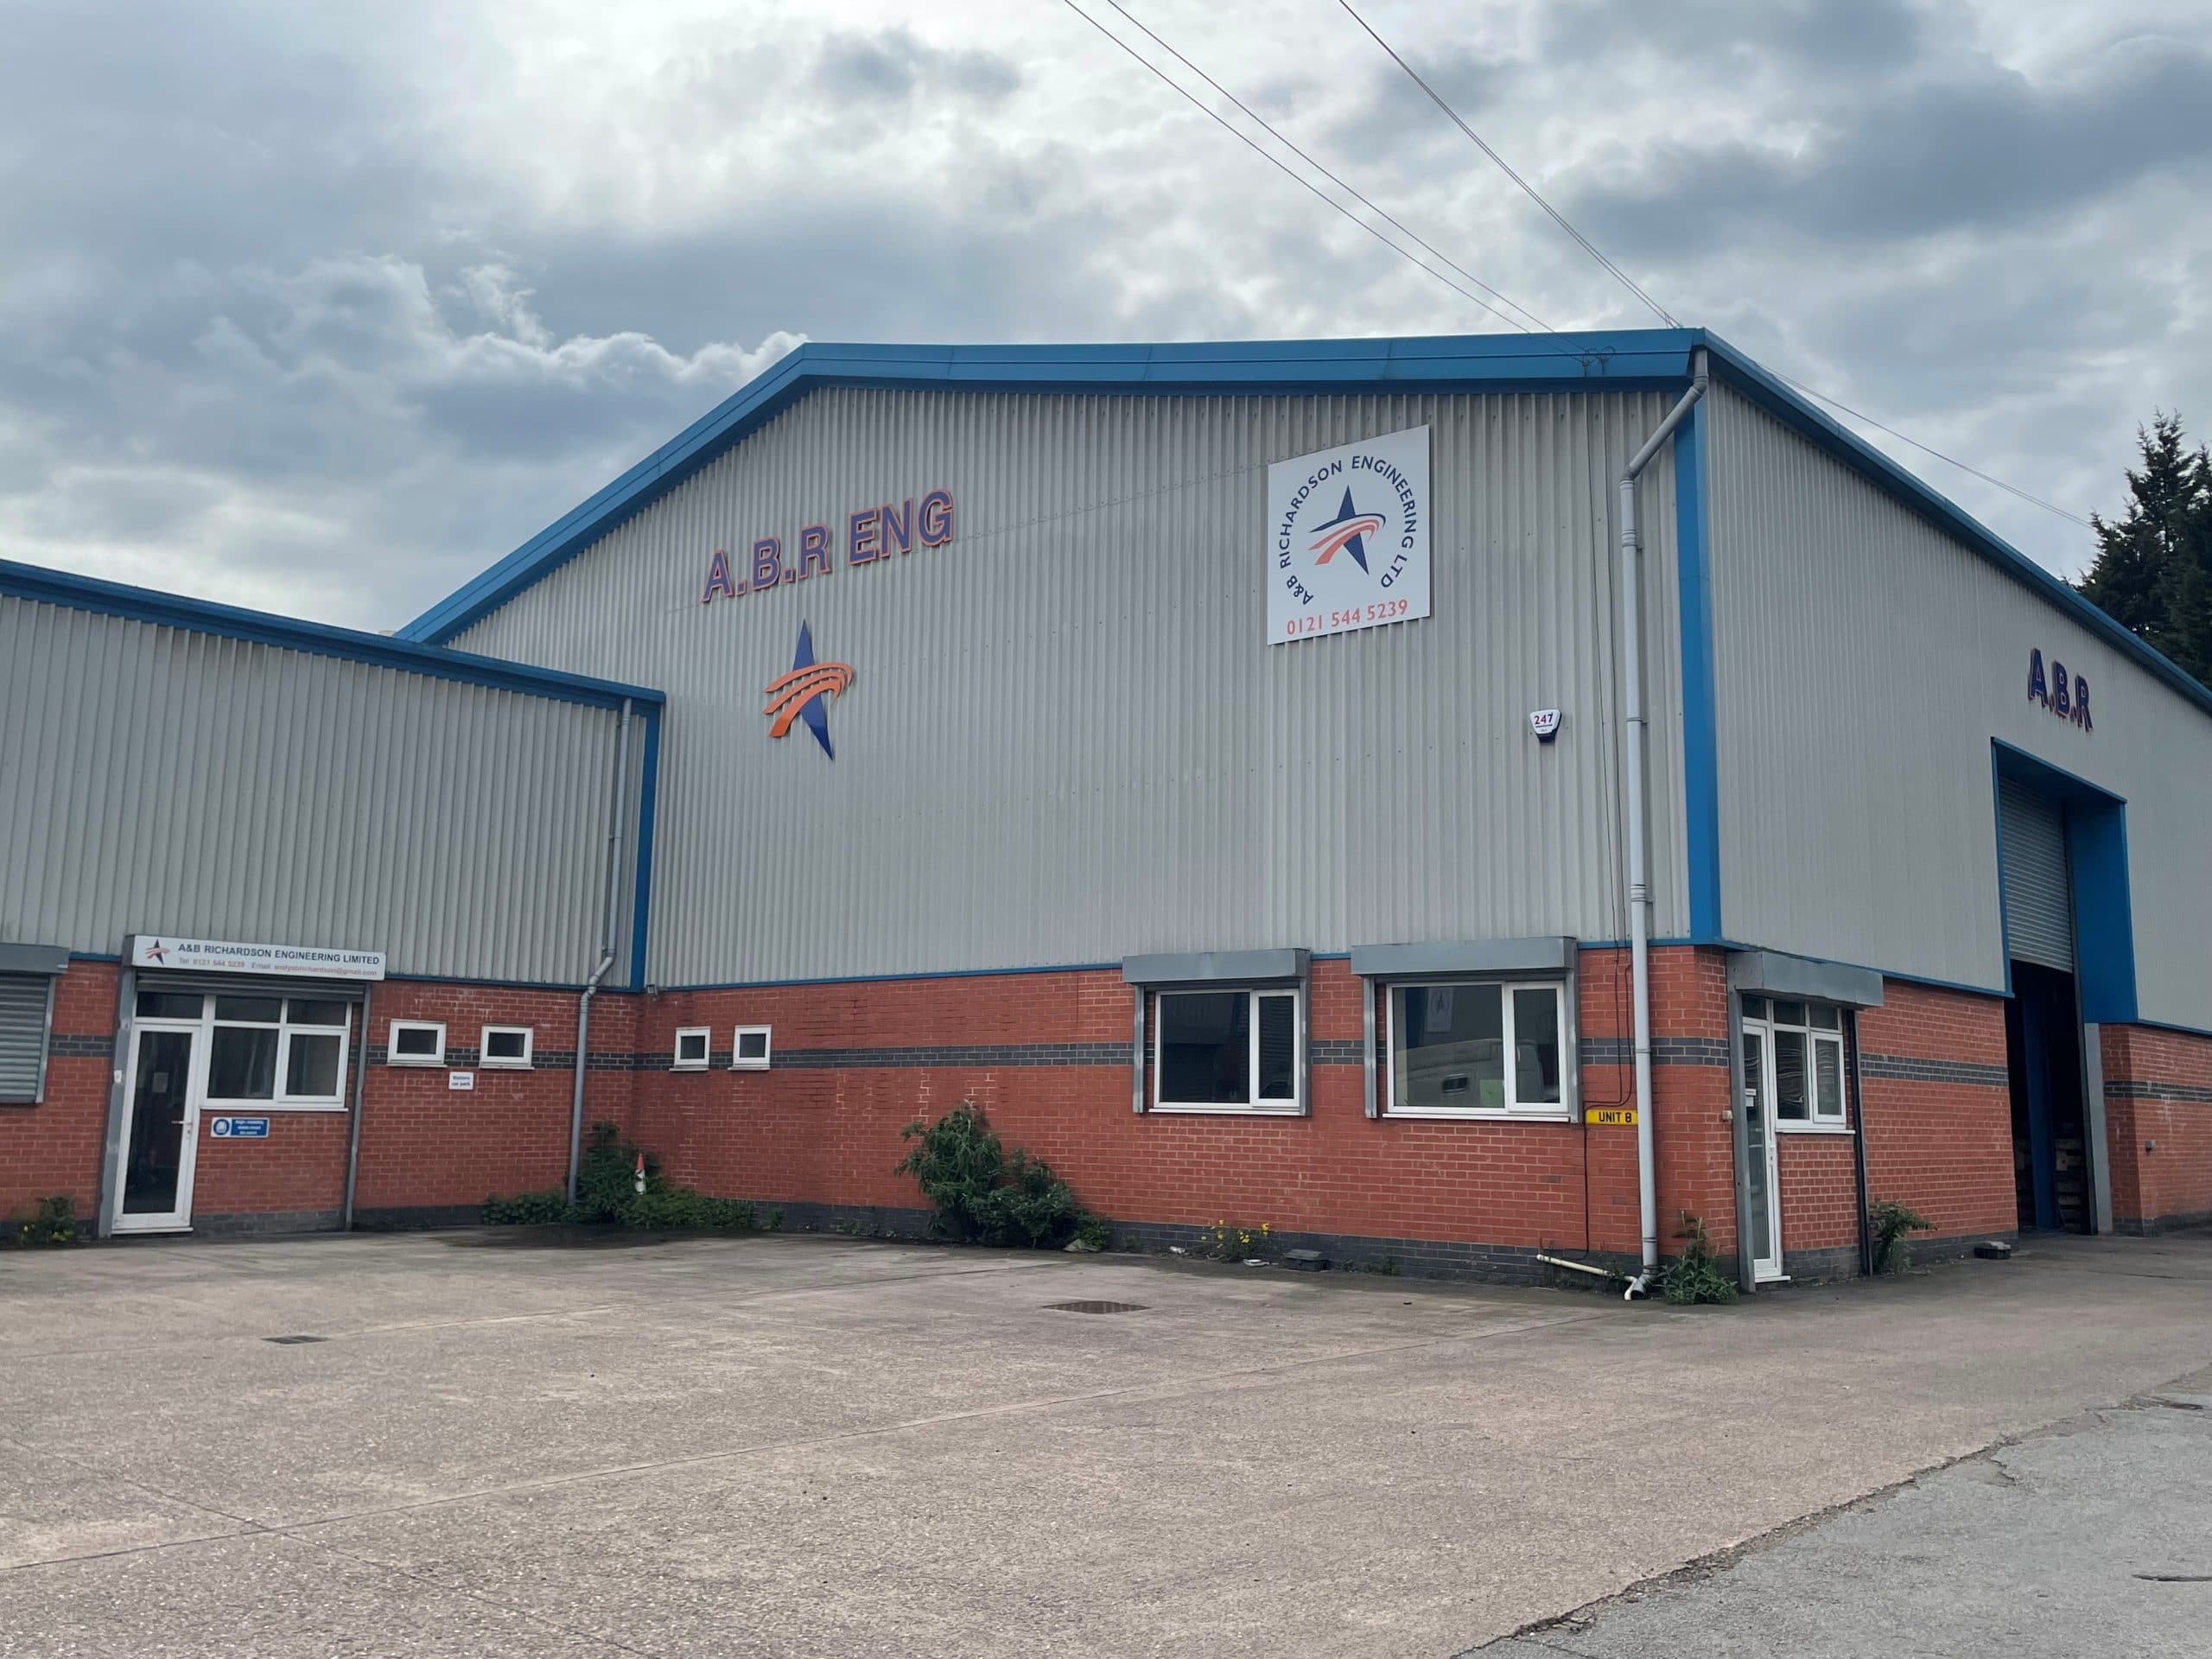 Somers Forge Acquires A&B Richardson Engineering